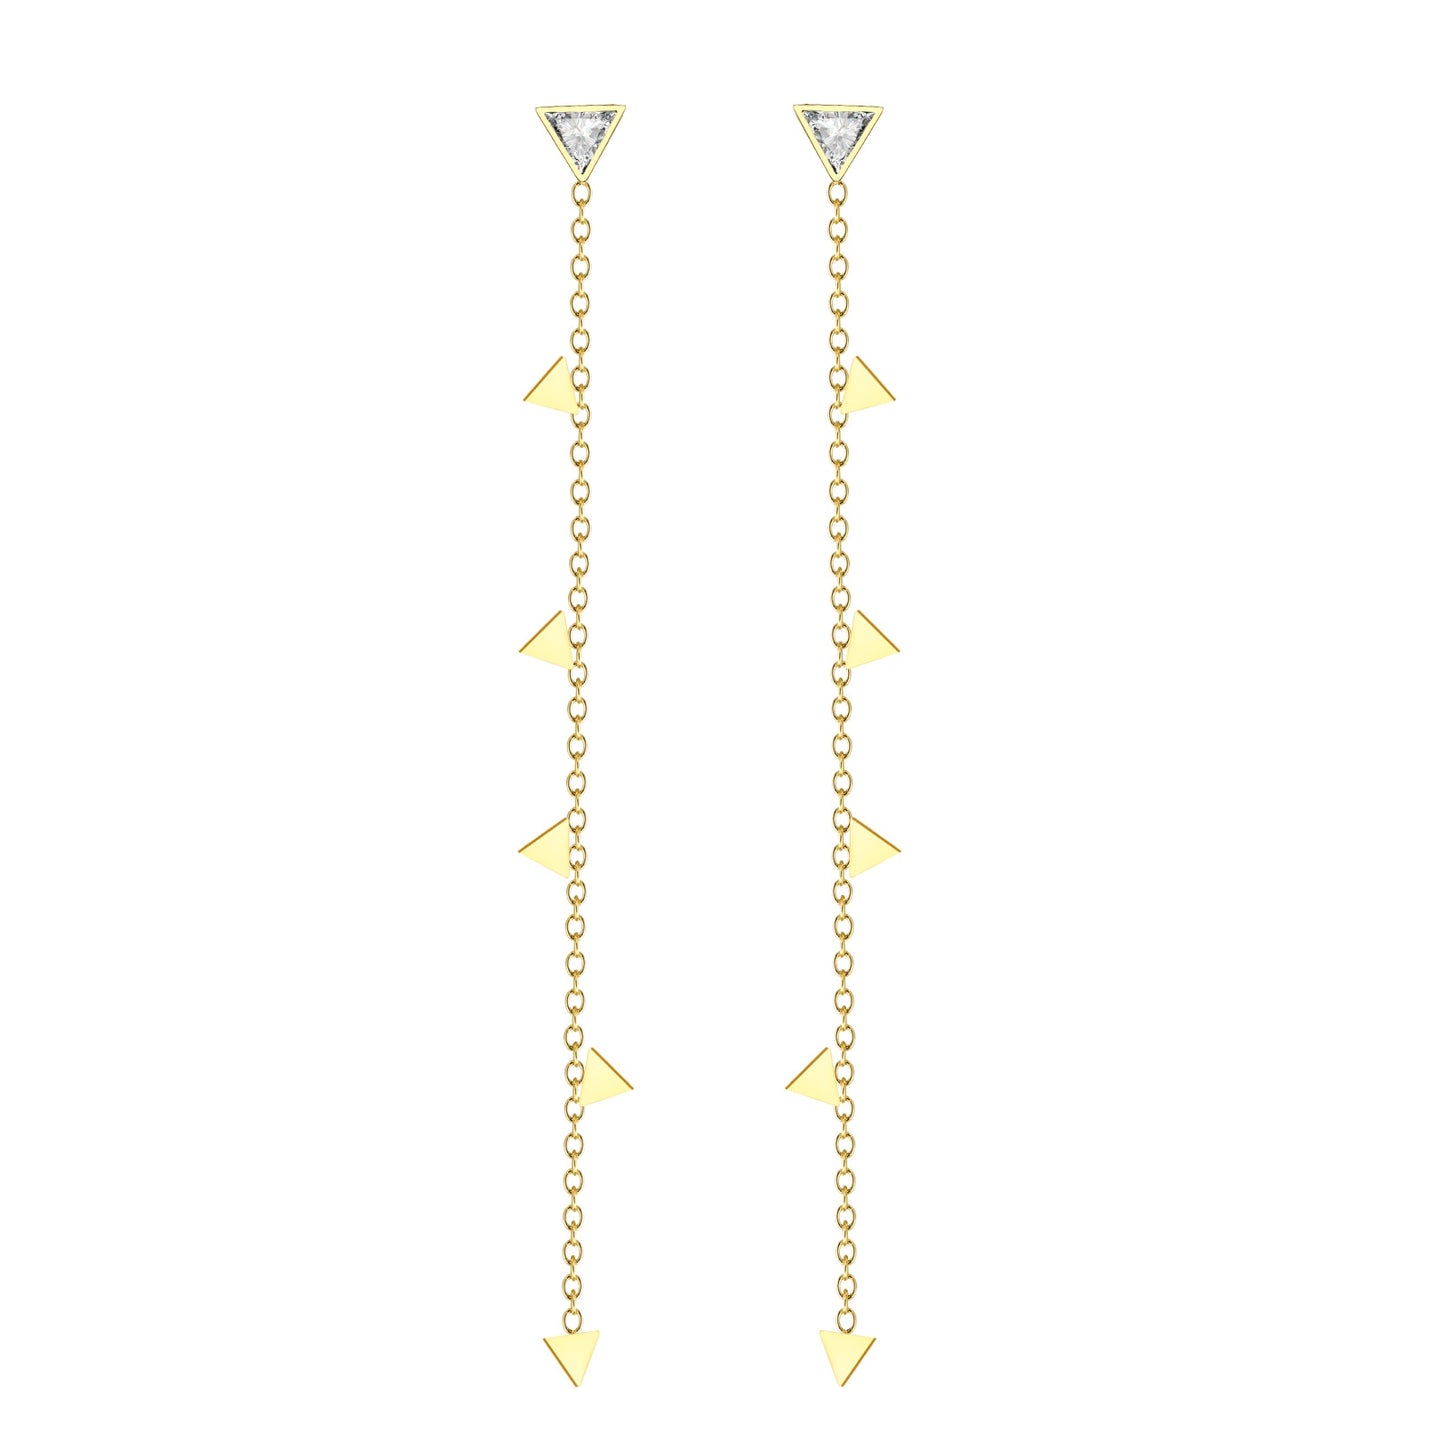 Aretes para mujeres Trendy Long Chain Earrings for Women Lady, Gold Color Stainless Steel Geometric Round Tassel Style Ear Gifts for Her